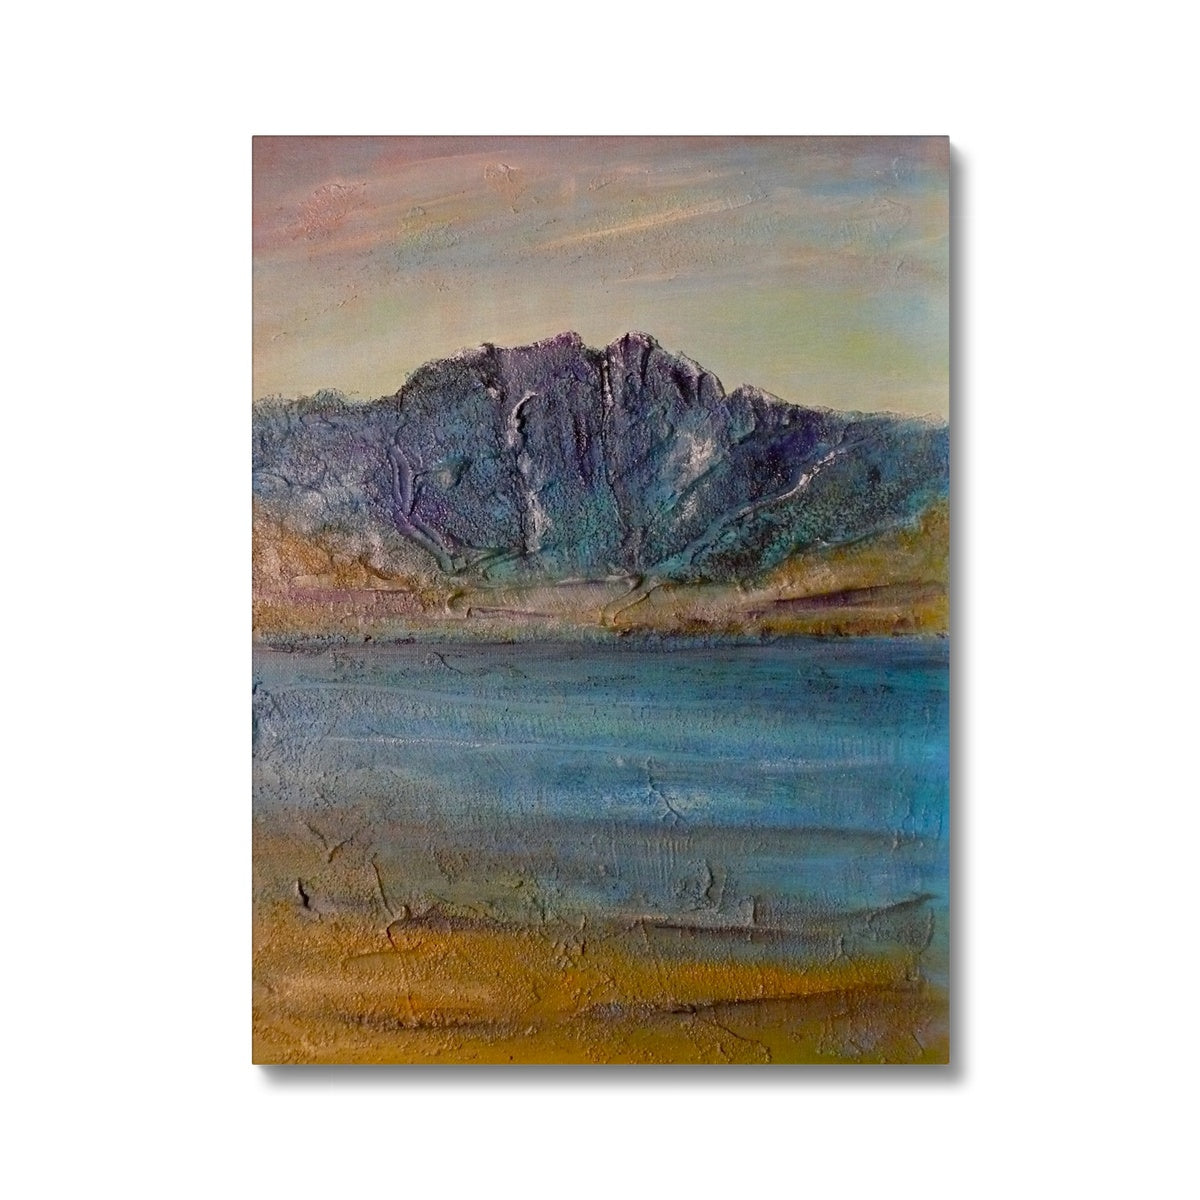 Torridon Painting | Canvas From Scotland-Contemporary Stretched Canvas Prints-Scottish Lochs & Mountains Art Gallery-18"x24"-Paintings, Prints, Homeware, Art Gifts From Scotland By Scottish Artist Kevin Hunter